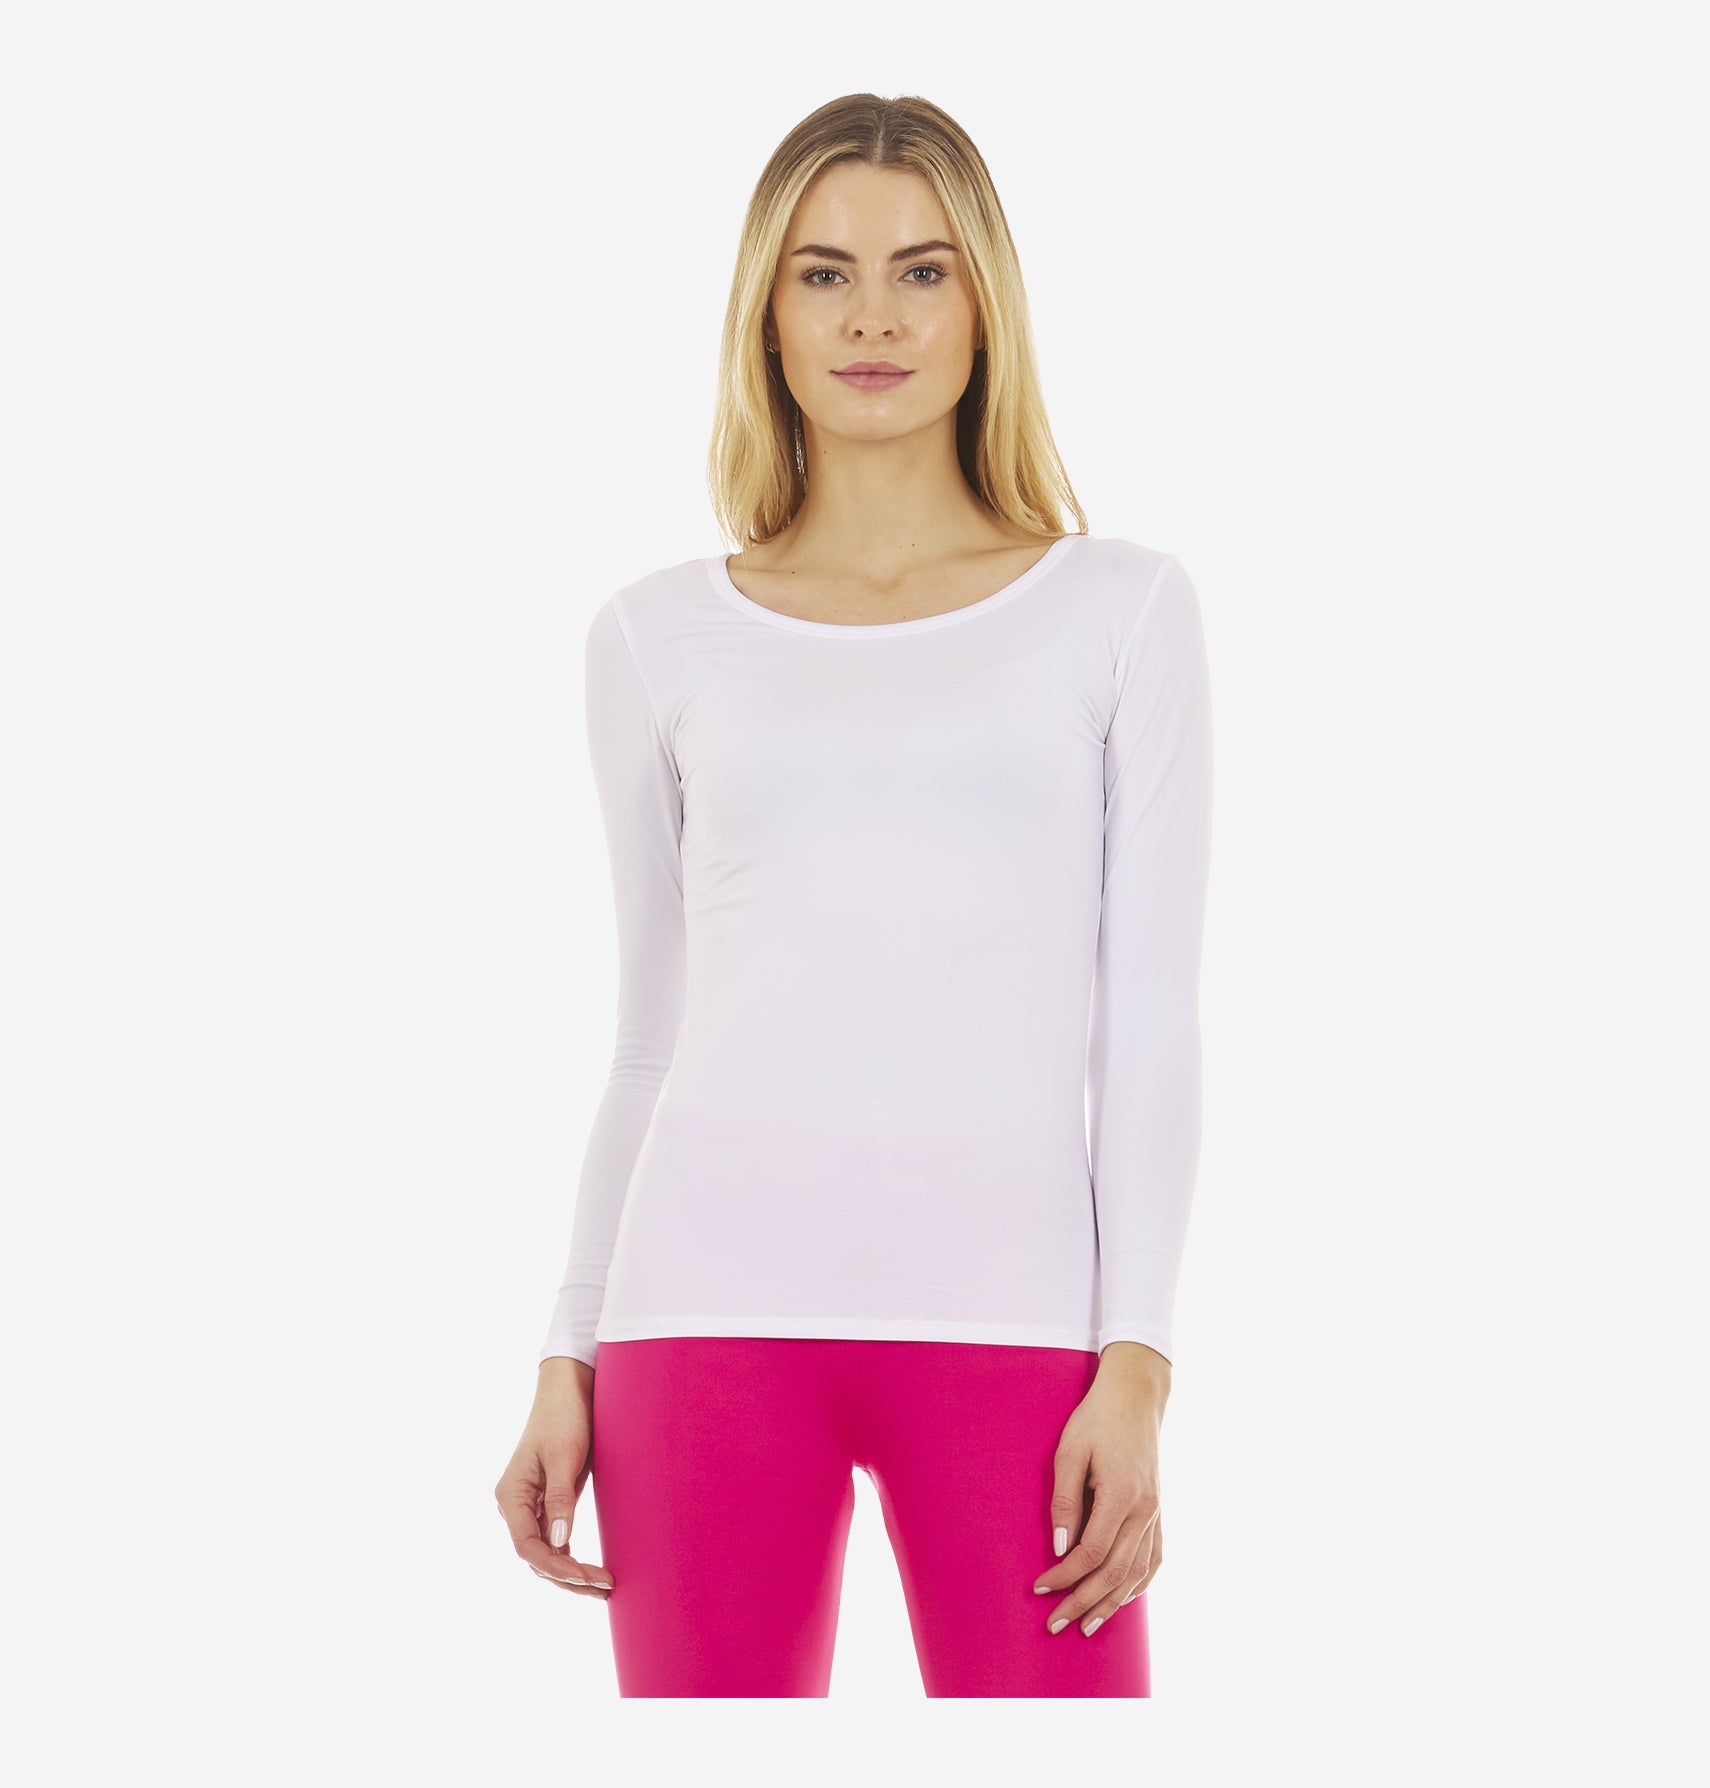 Thermajane Thermal Top & Set for Women Size S Baby Pink, White at